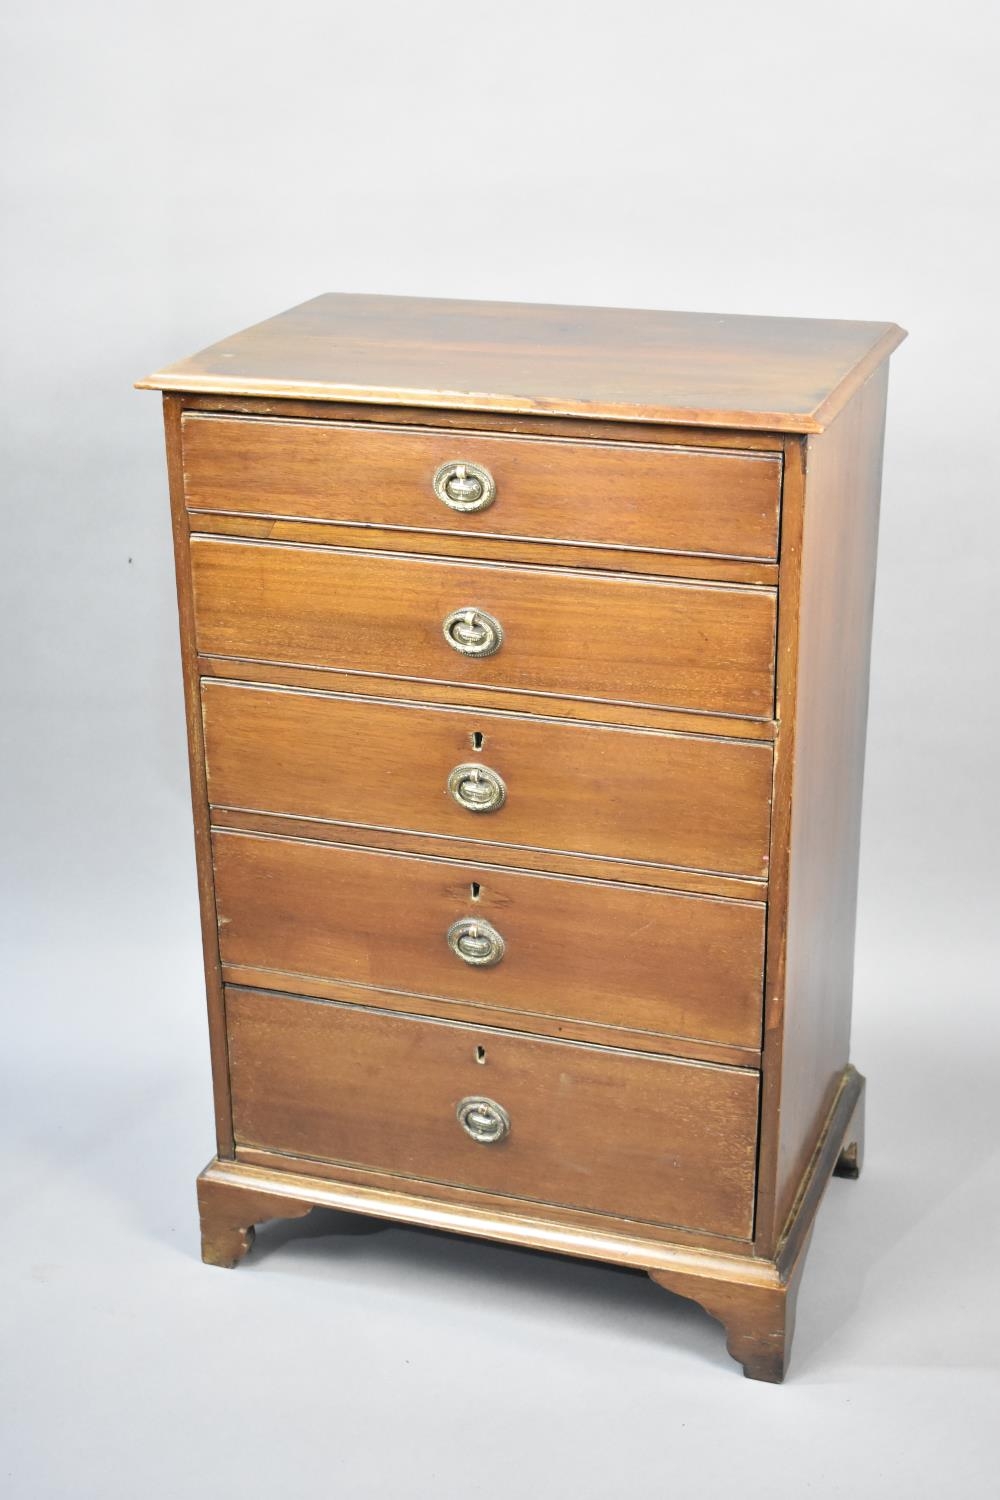 A Mahogany Chest of Five Short Drawers on Bracket Feet having Drop Cast Handles with Urn Motif, - Image 2 of 2